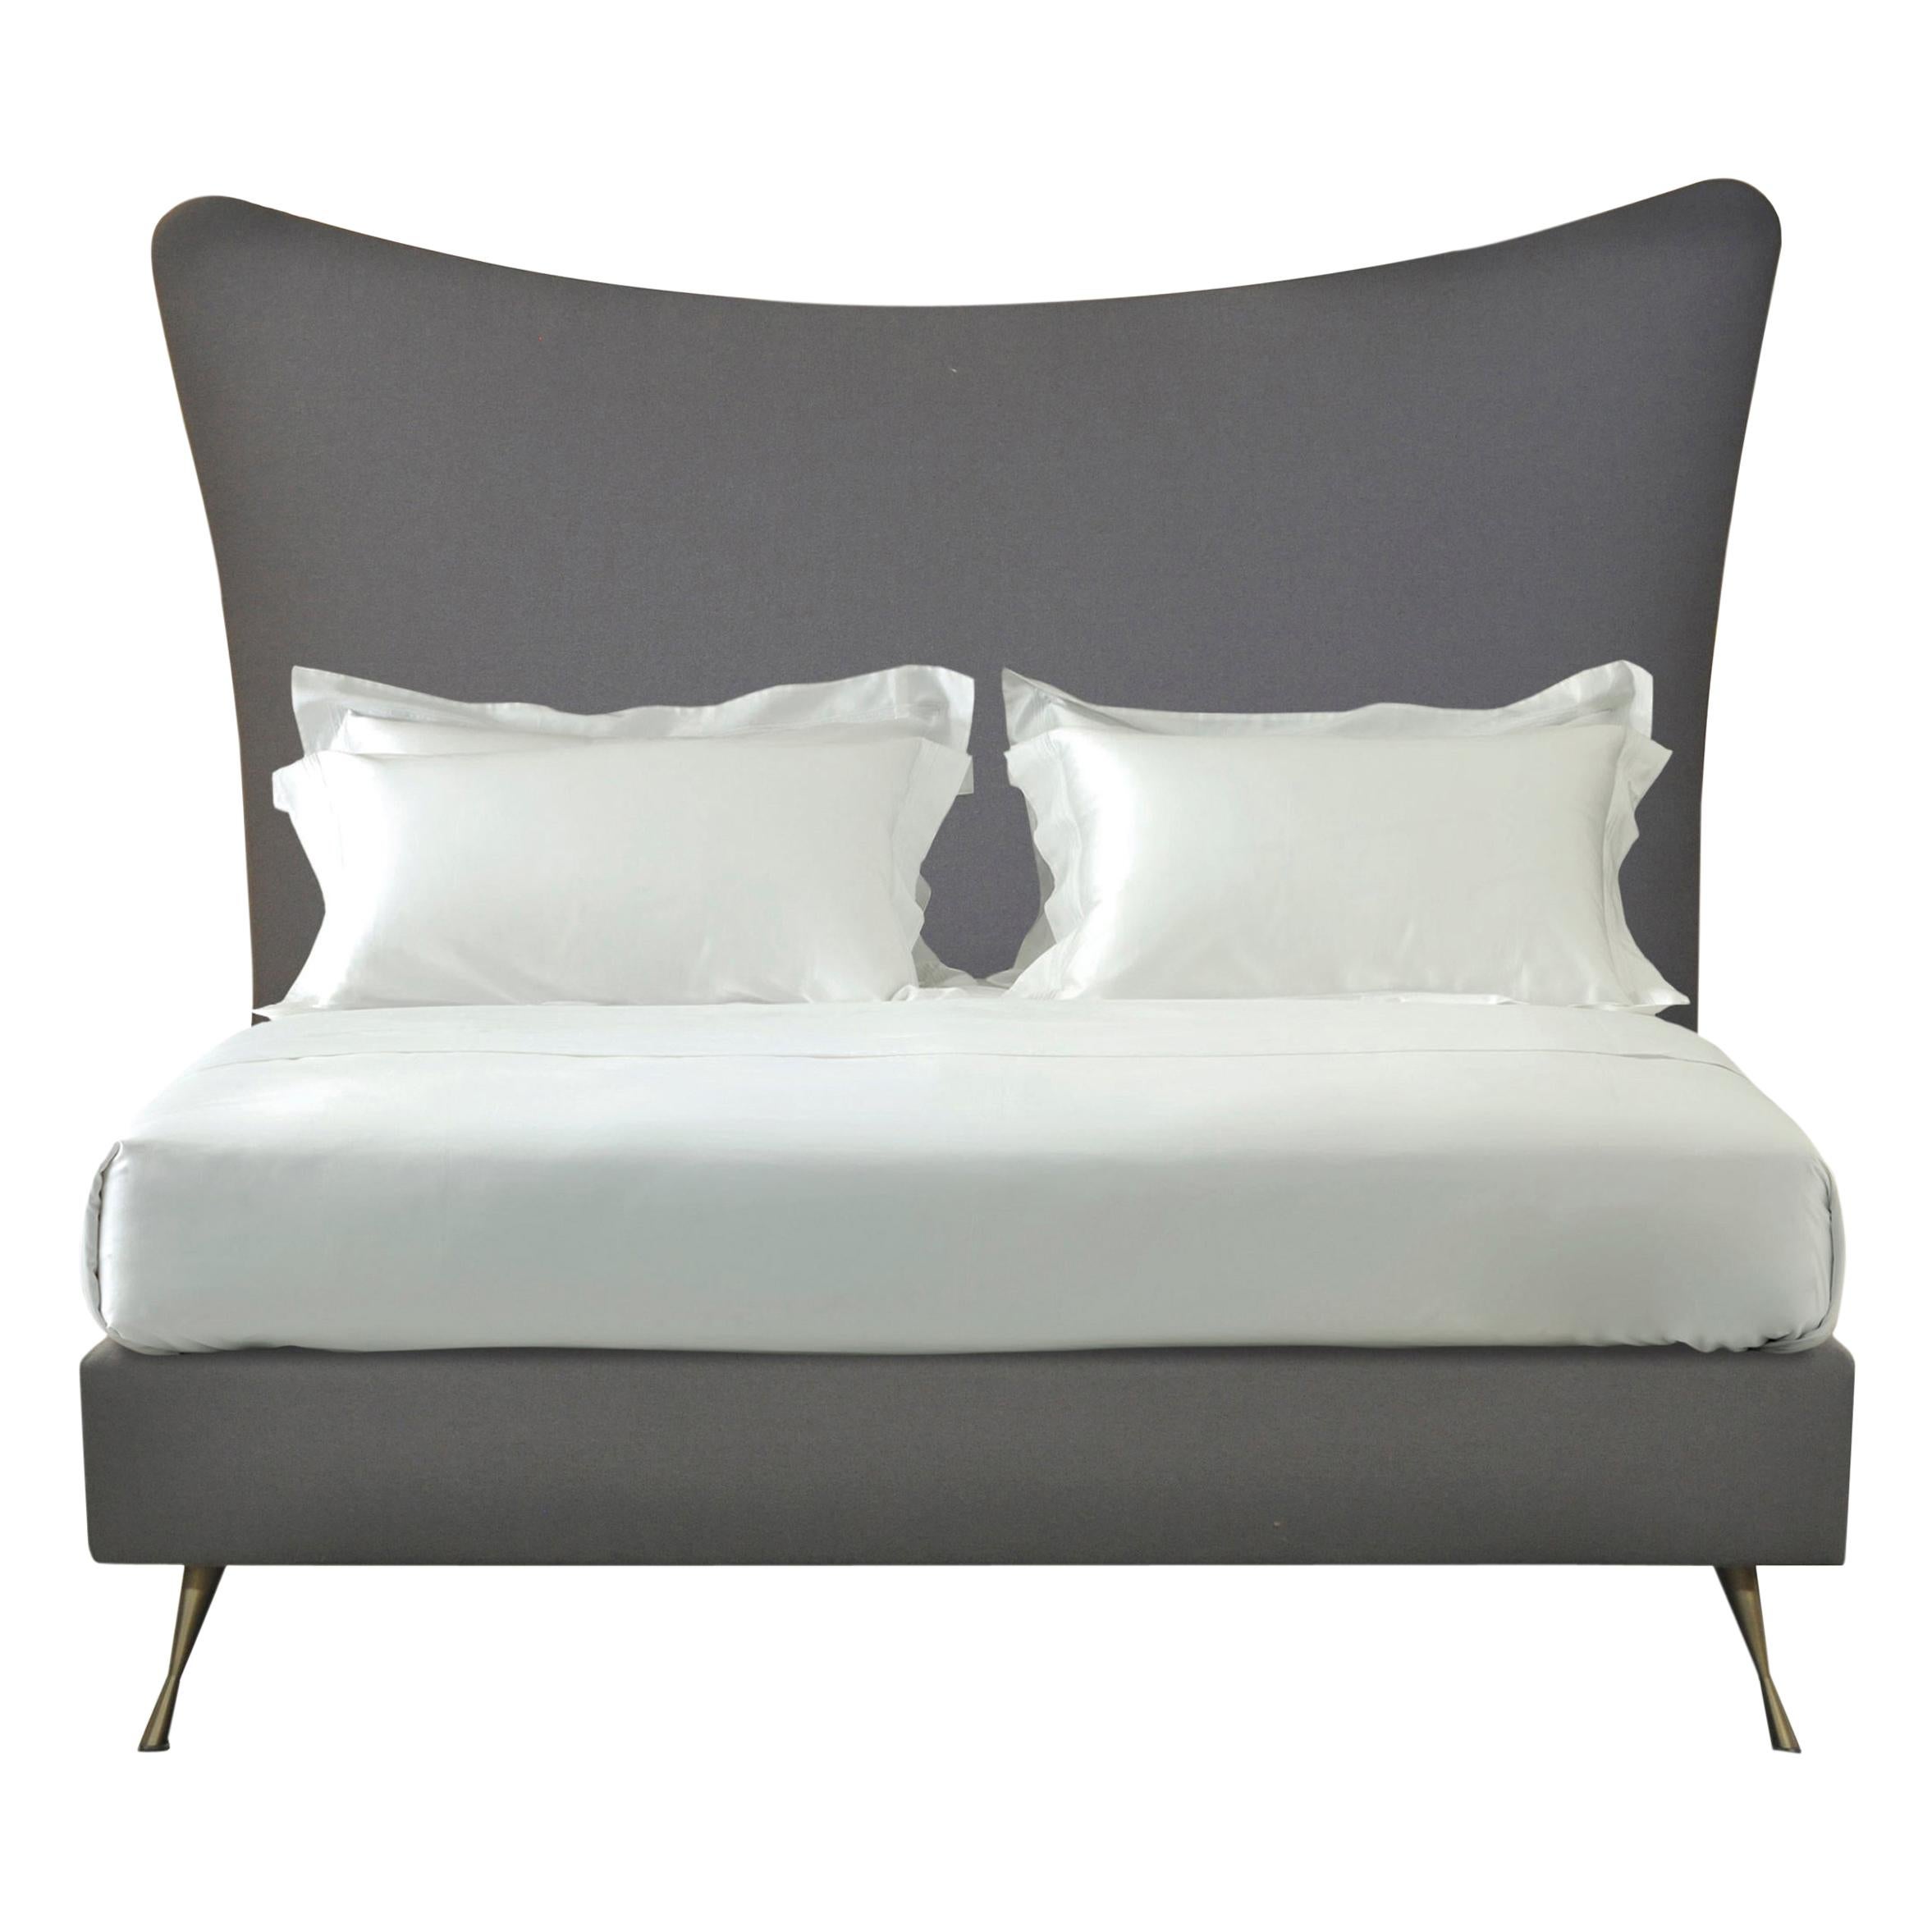 Savoir Grey Amelia & Nº4 Bed Set, Handcrafted to Order, US King Size For Sale